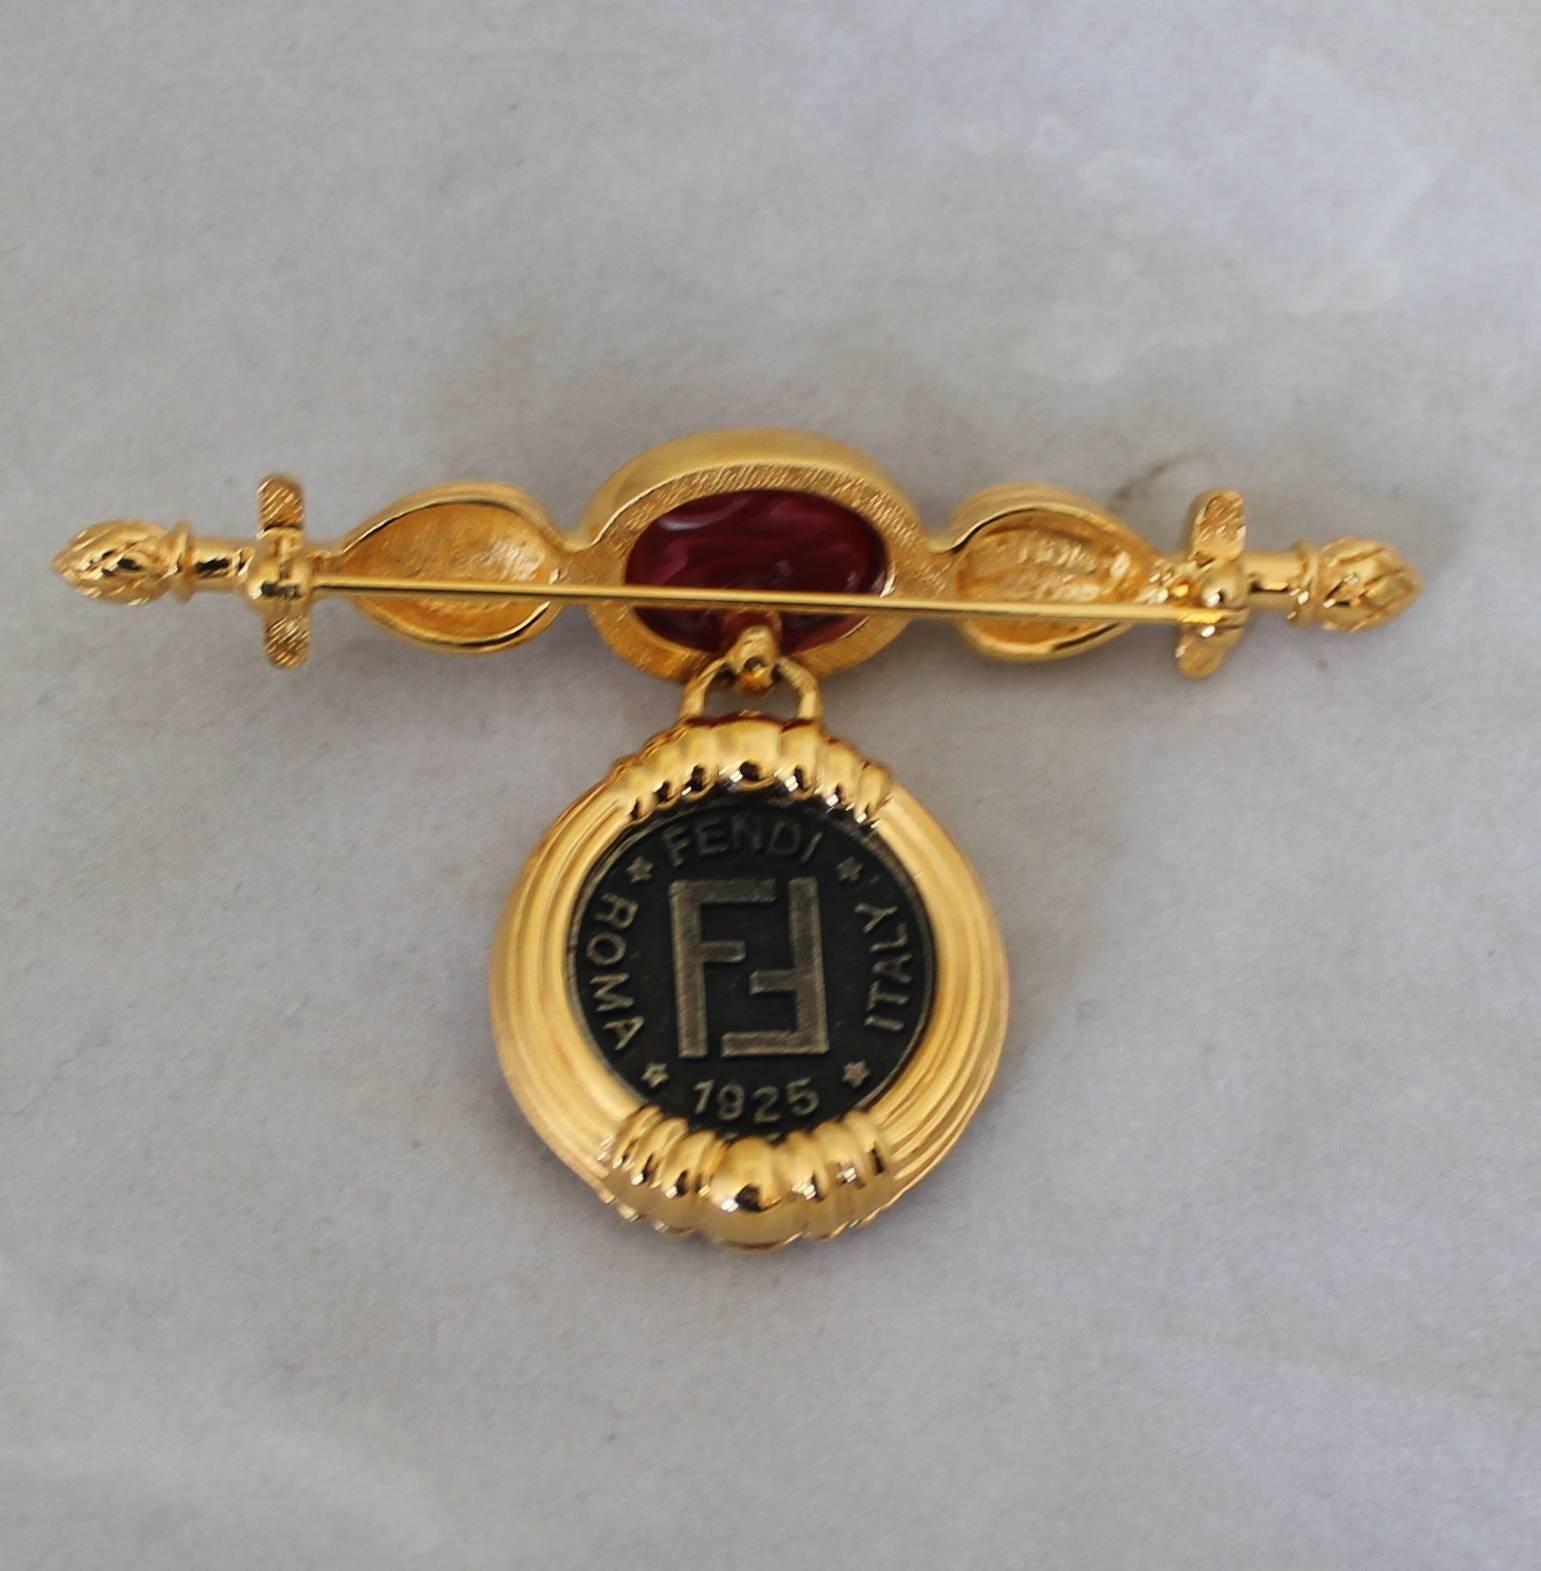 1980's Vintage Fendi Cabochon & Double Janis Head Coin Goldtone Pin. This pin is in excellent vintage condition.

Height- 1.75"
Width- 3"